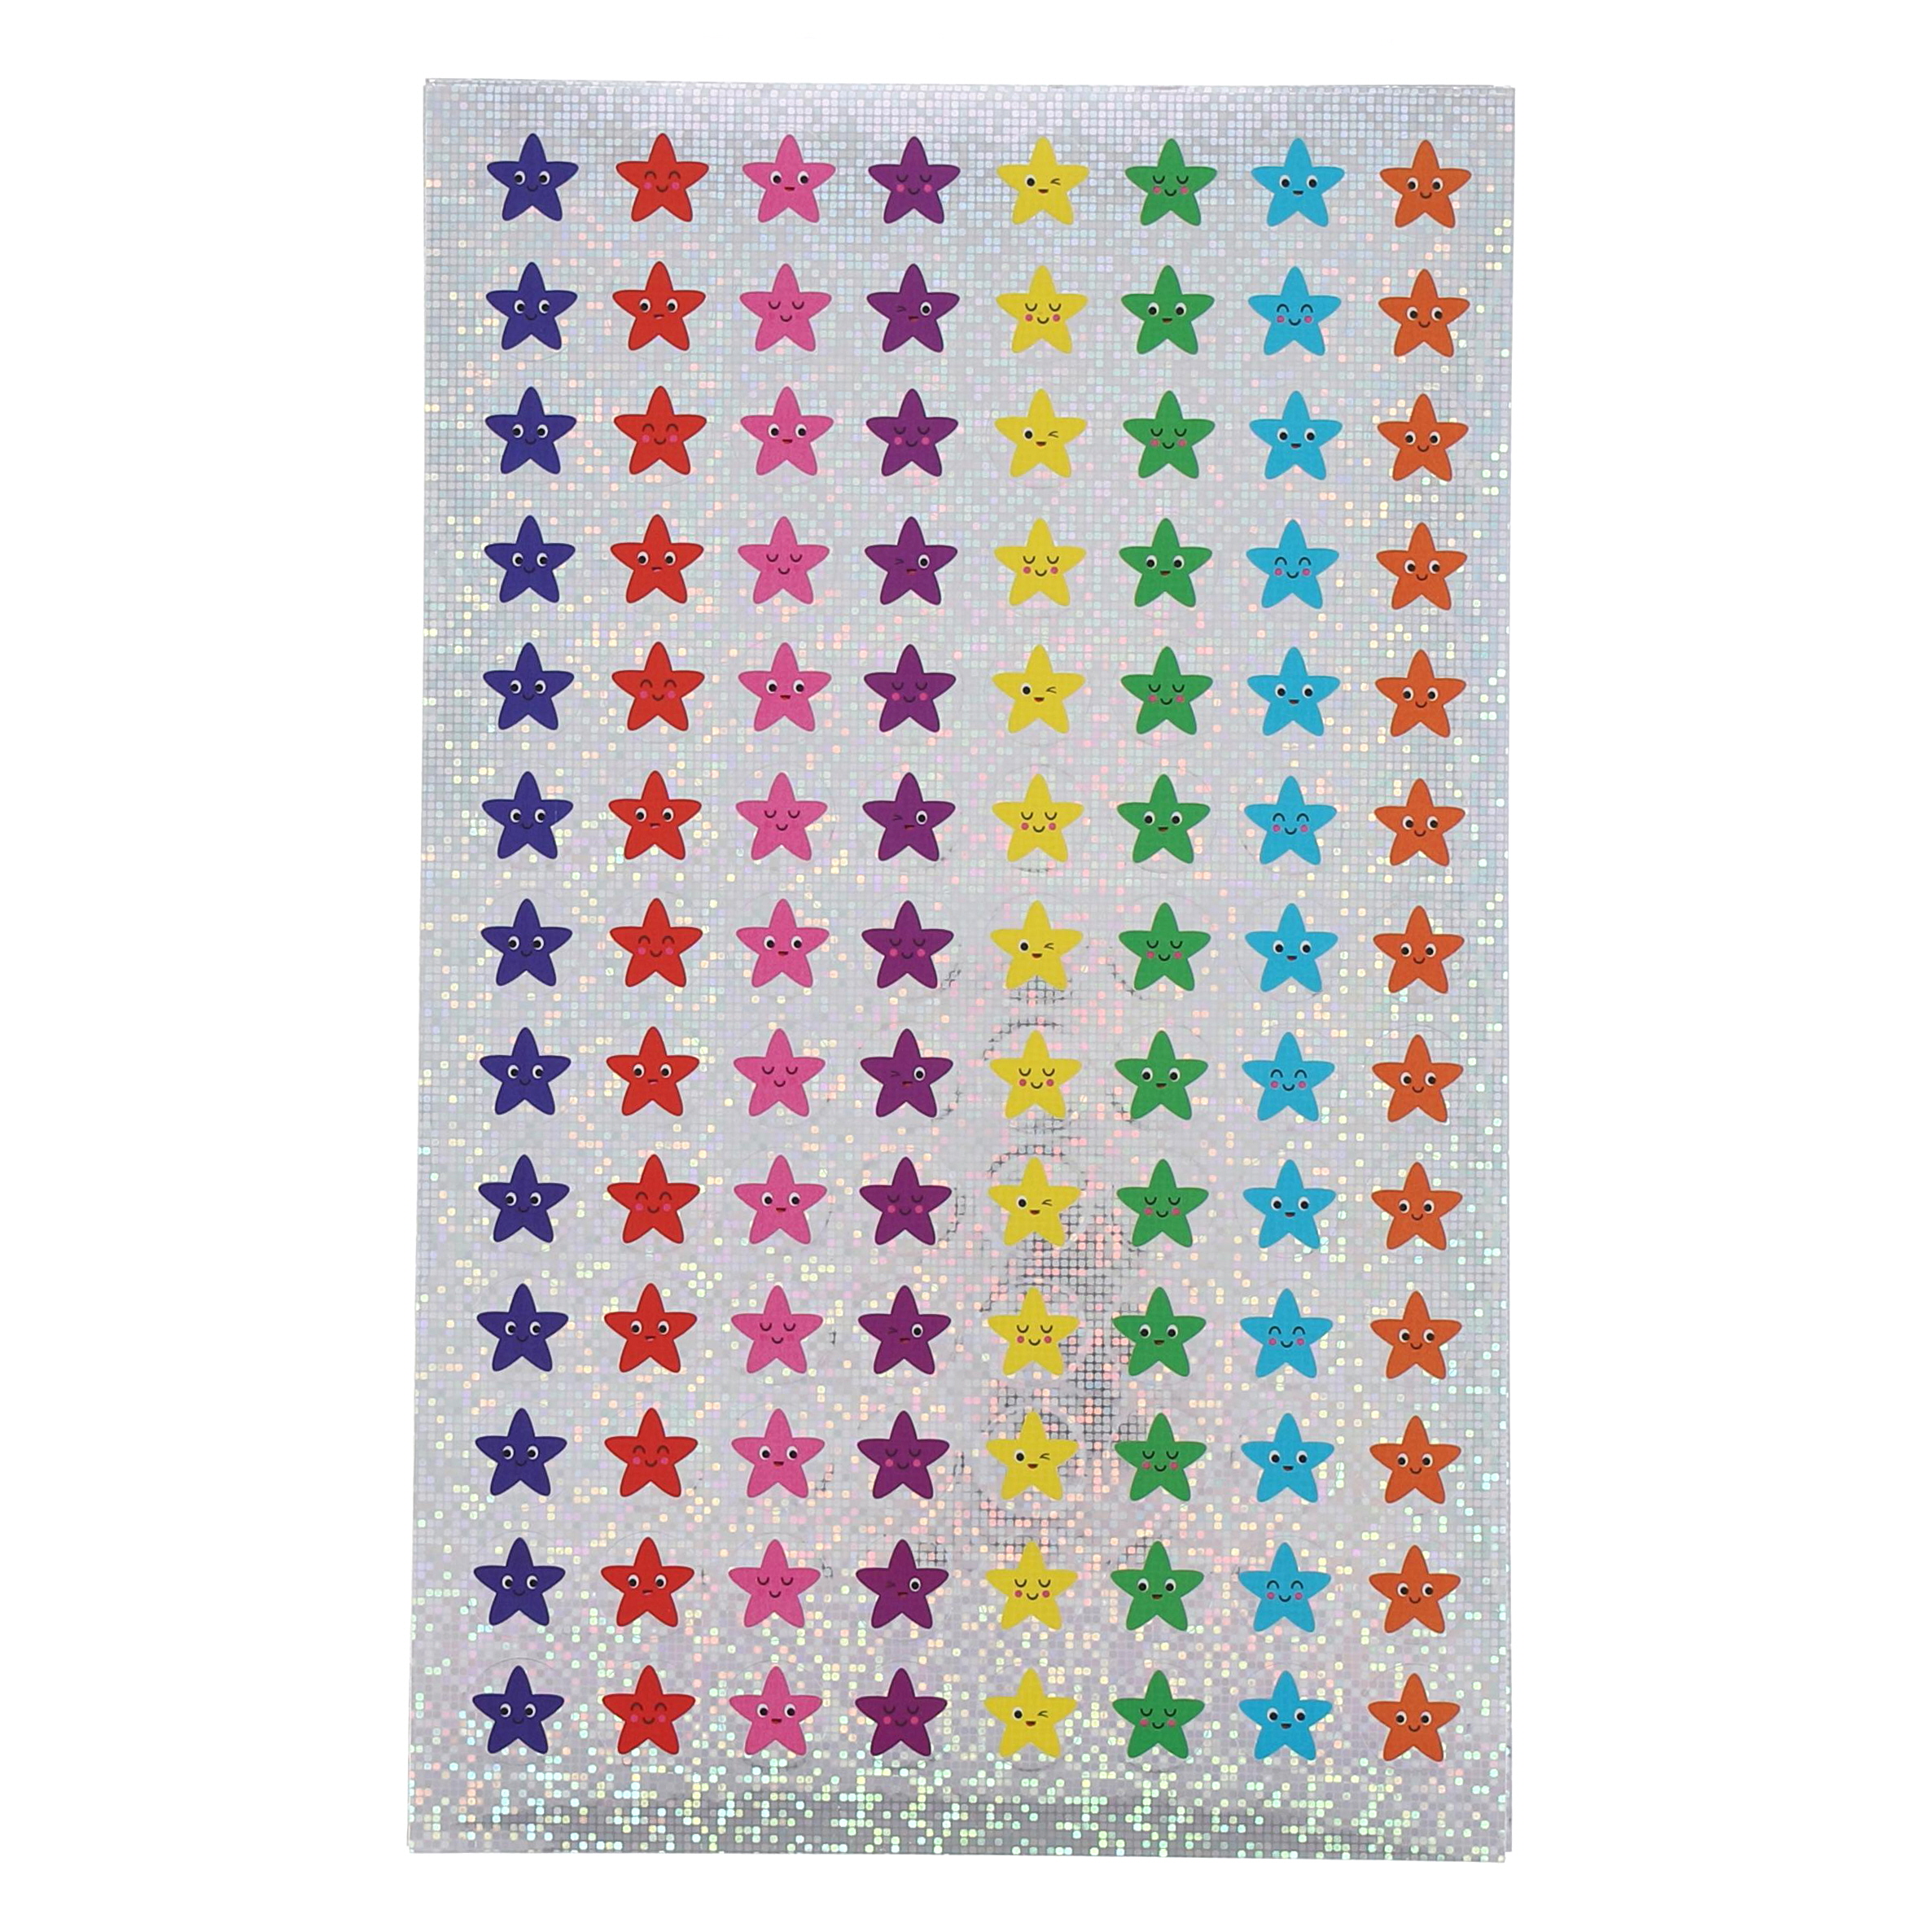 He1778915 Classmates Sparkly Mini Star Stickers 12mm Pack Of 416